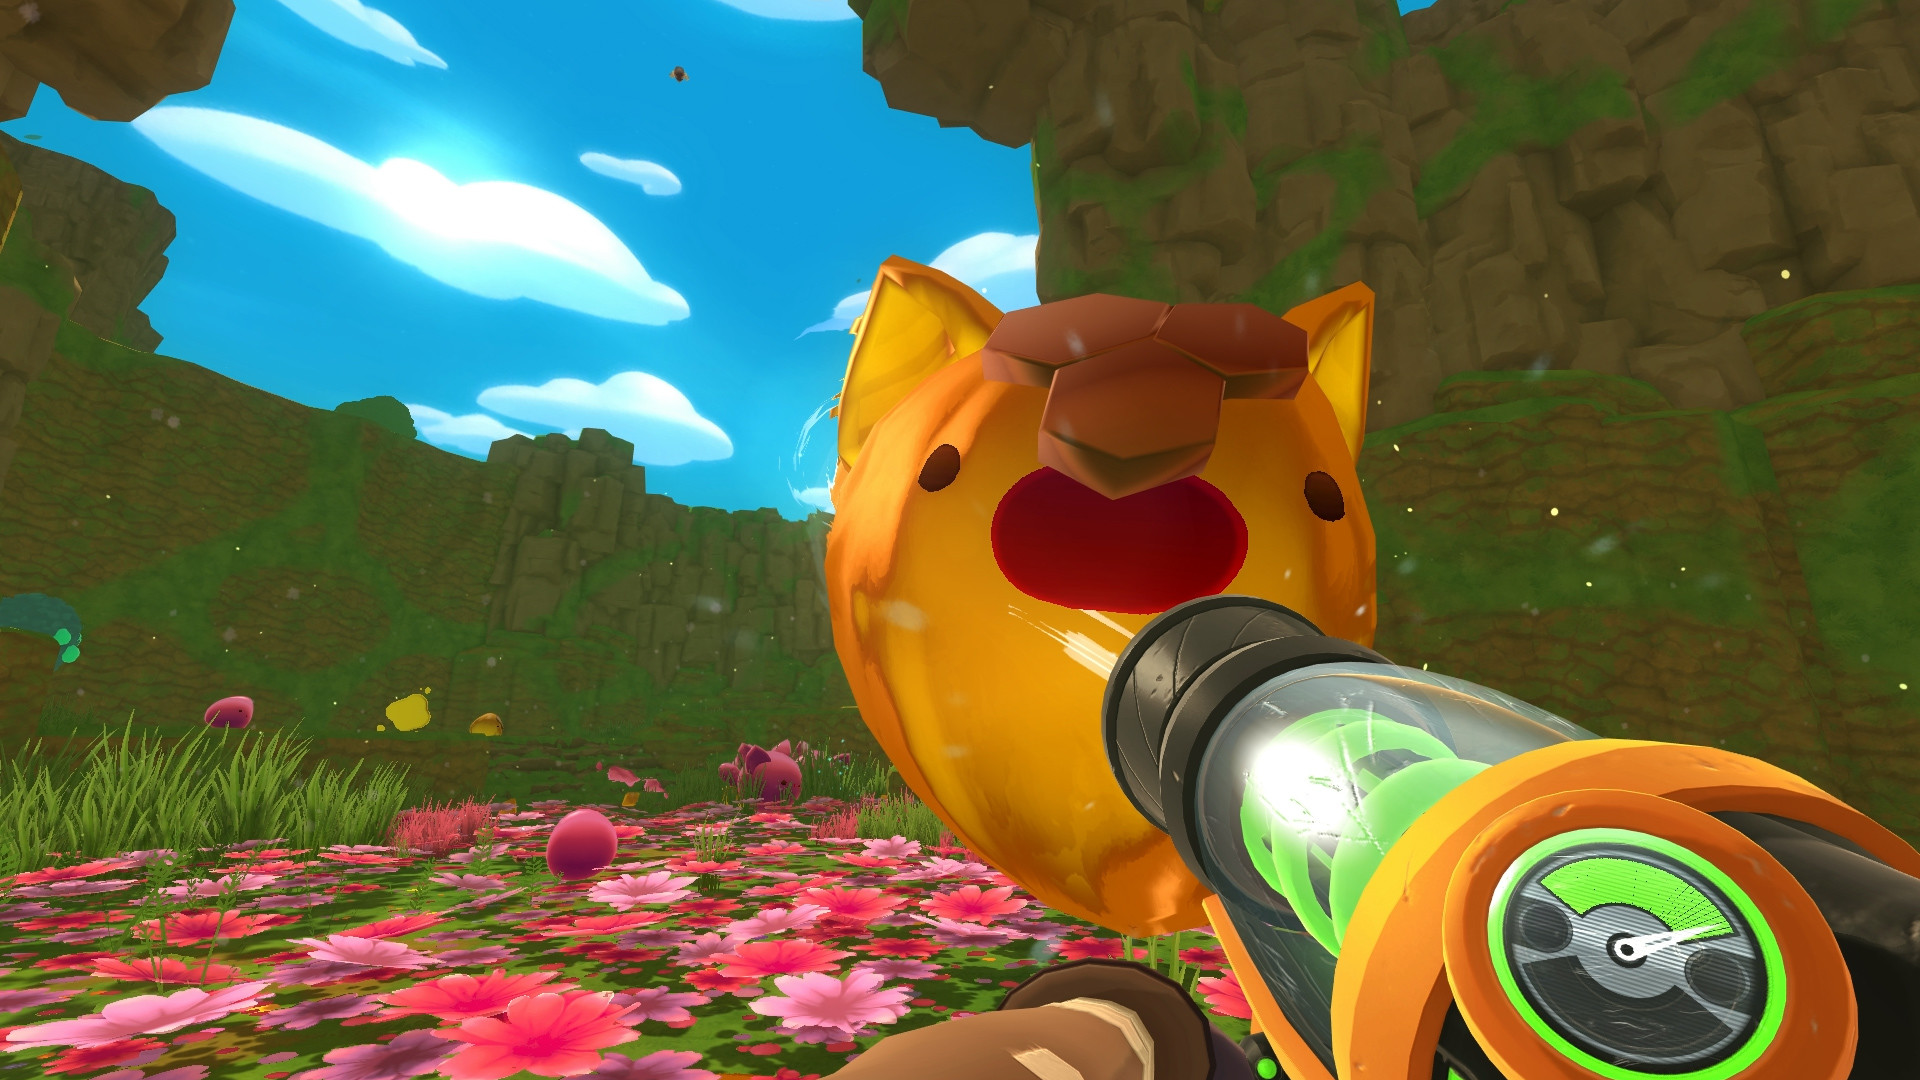 slime rancher two download free